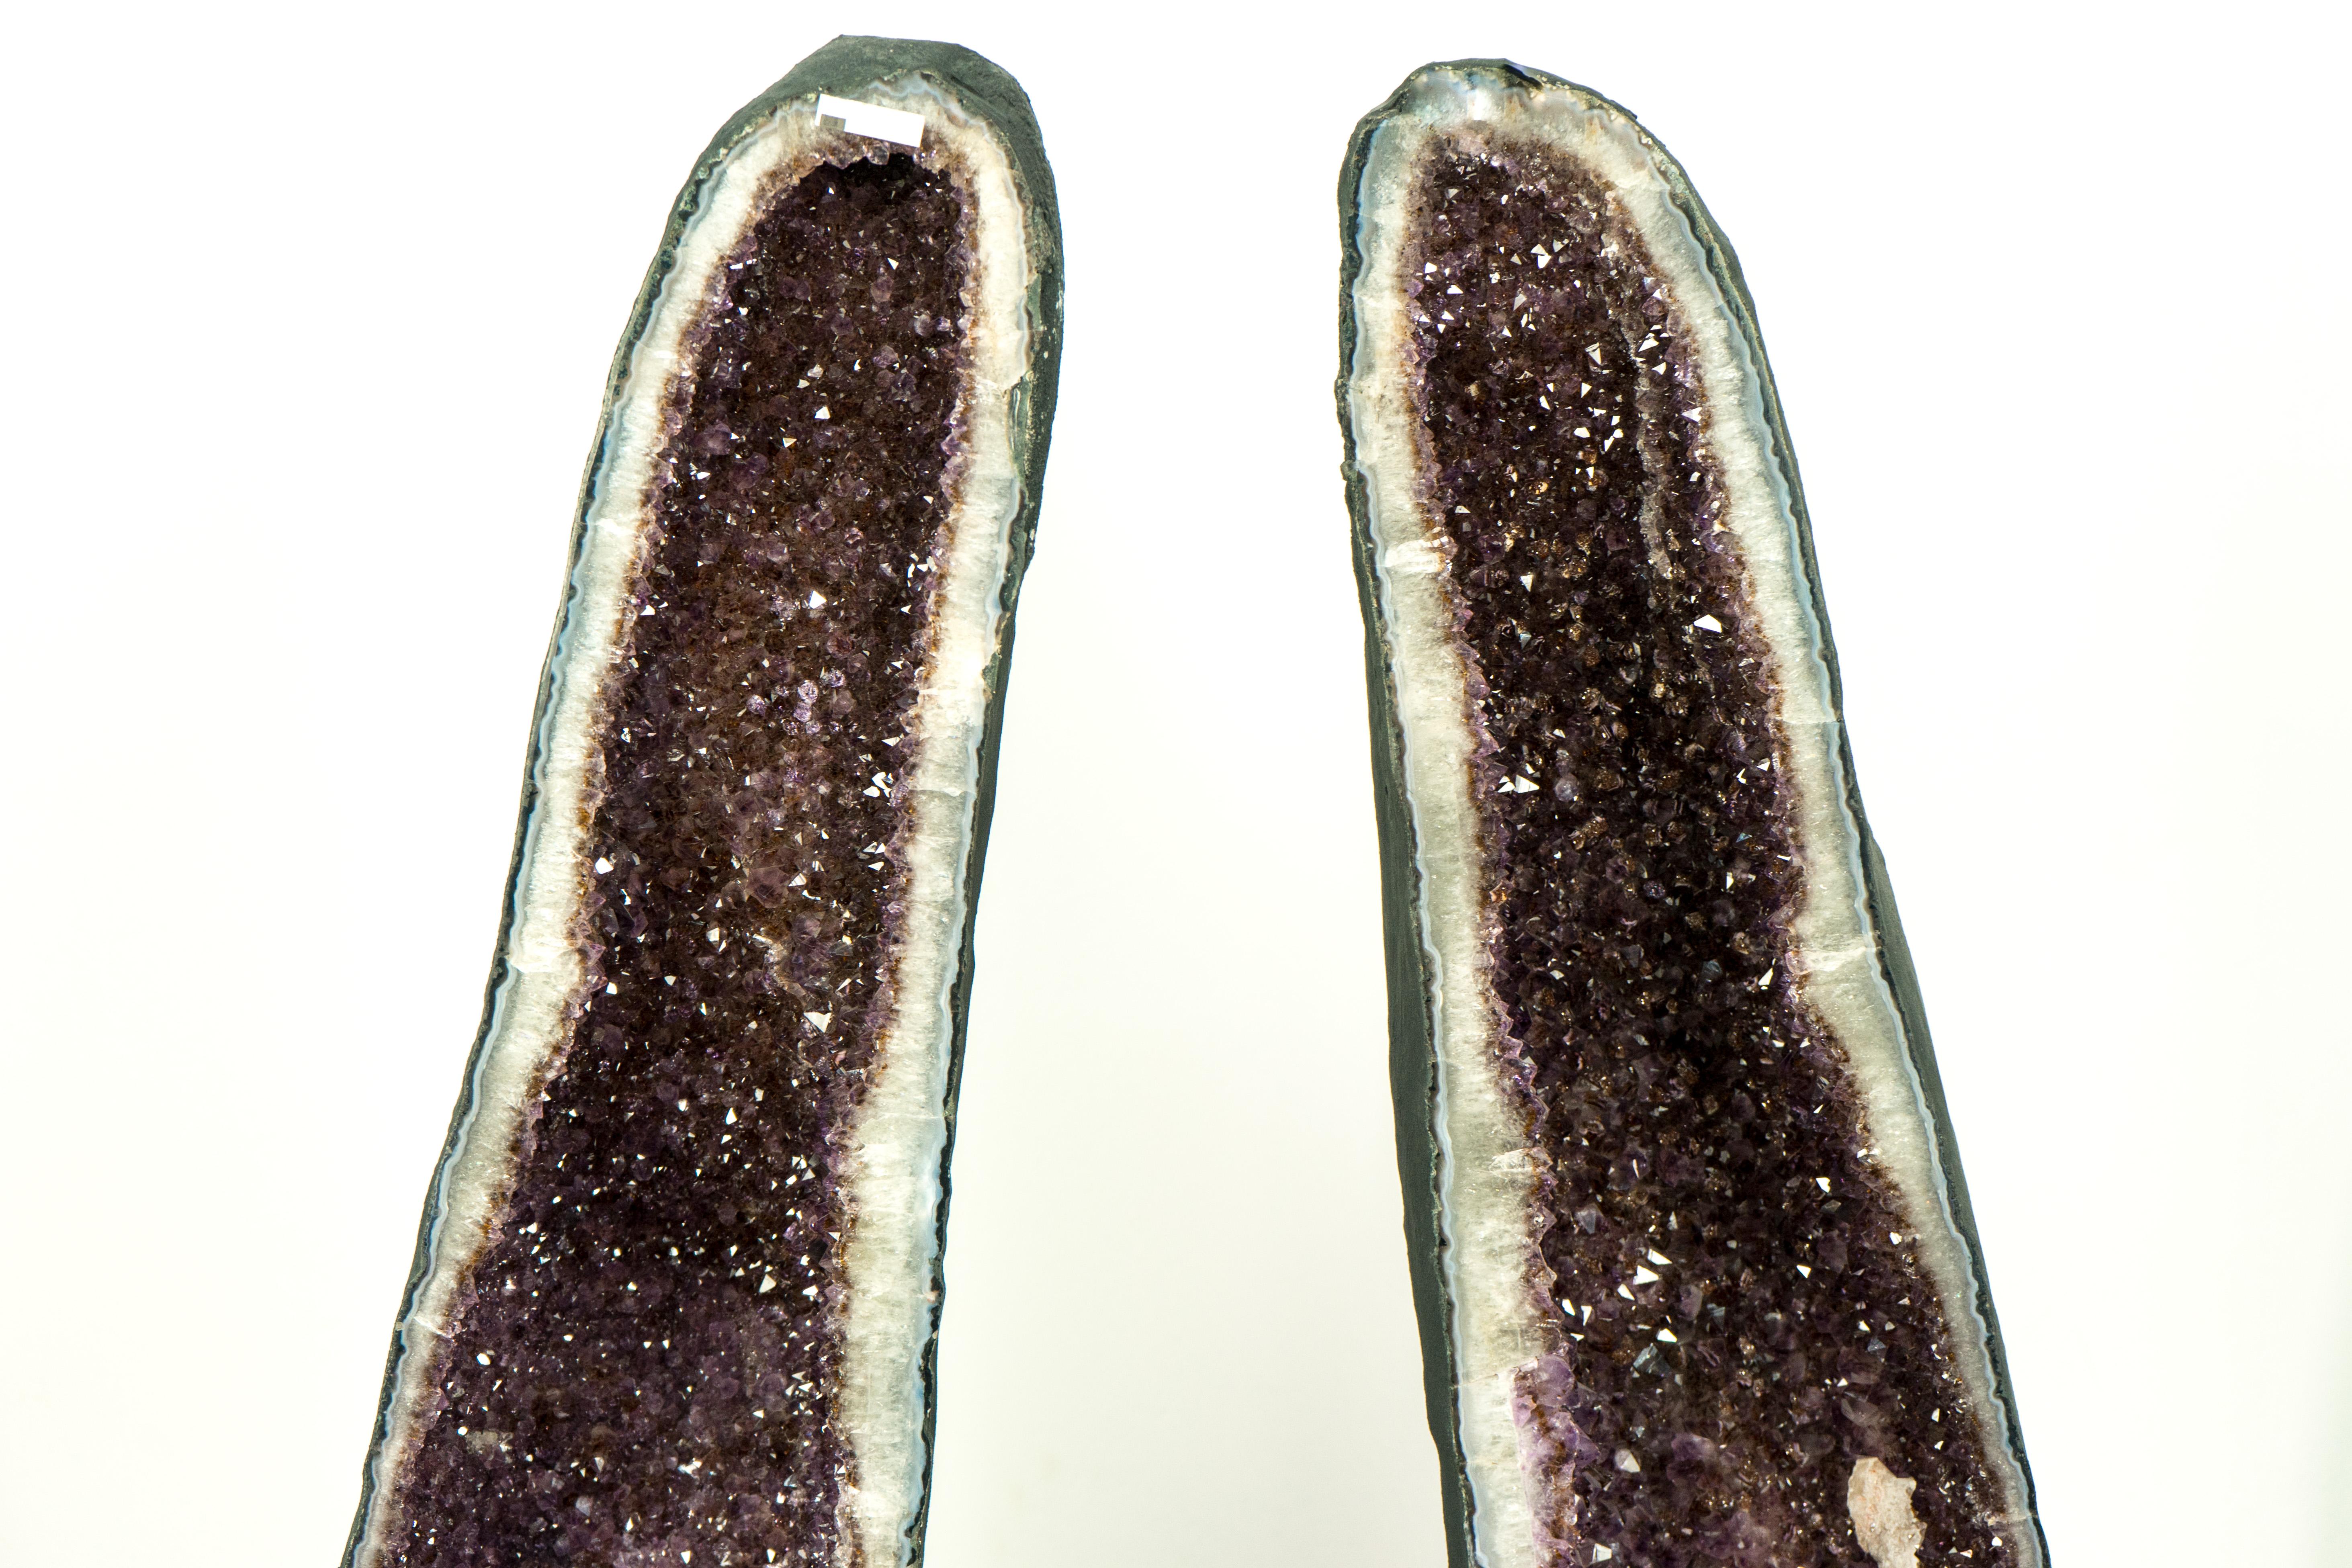 Contemporary Pair of 5 Ft Tall Large Amethyst Geode Cathedrals with Sparkly Lavender Amethyst For Sale